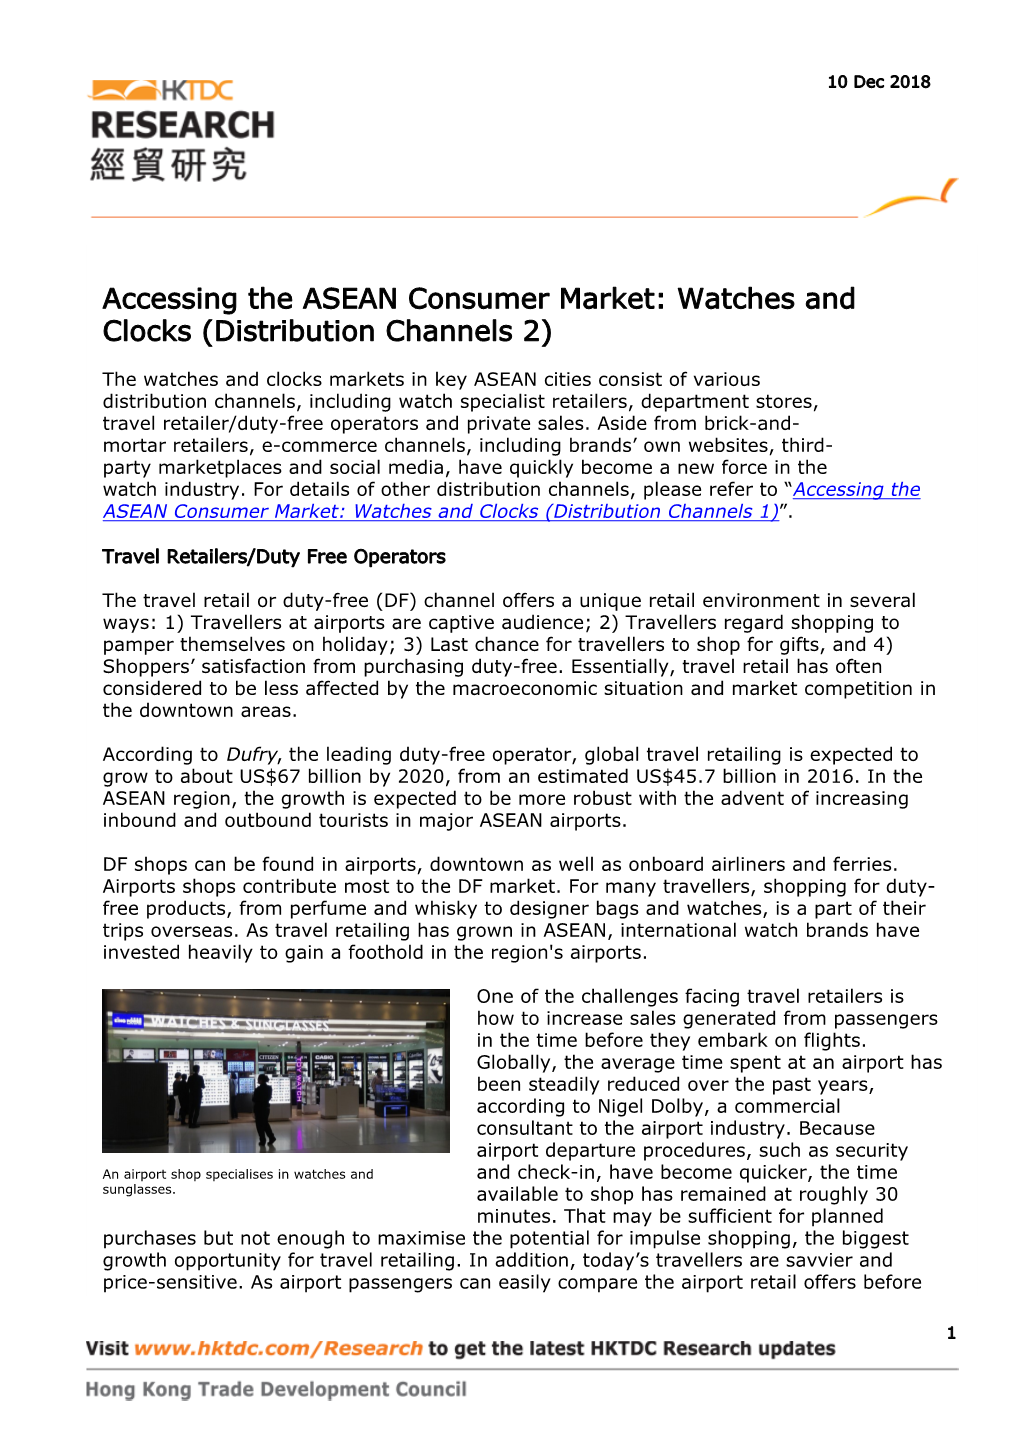 Accessing the ASEAN Consumer Market: Watches and Clocks (Distribution Channels 2) | HKTDC